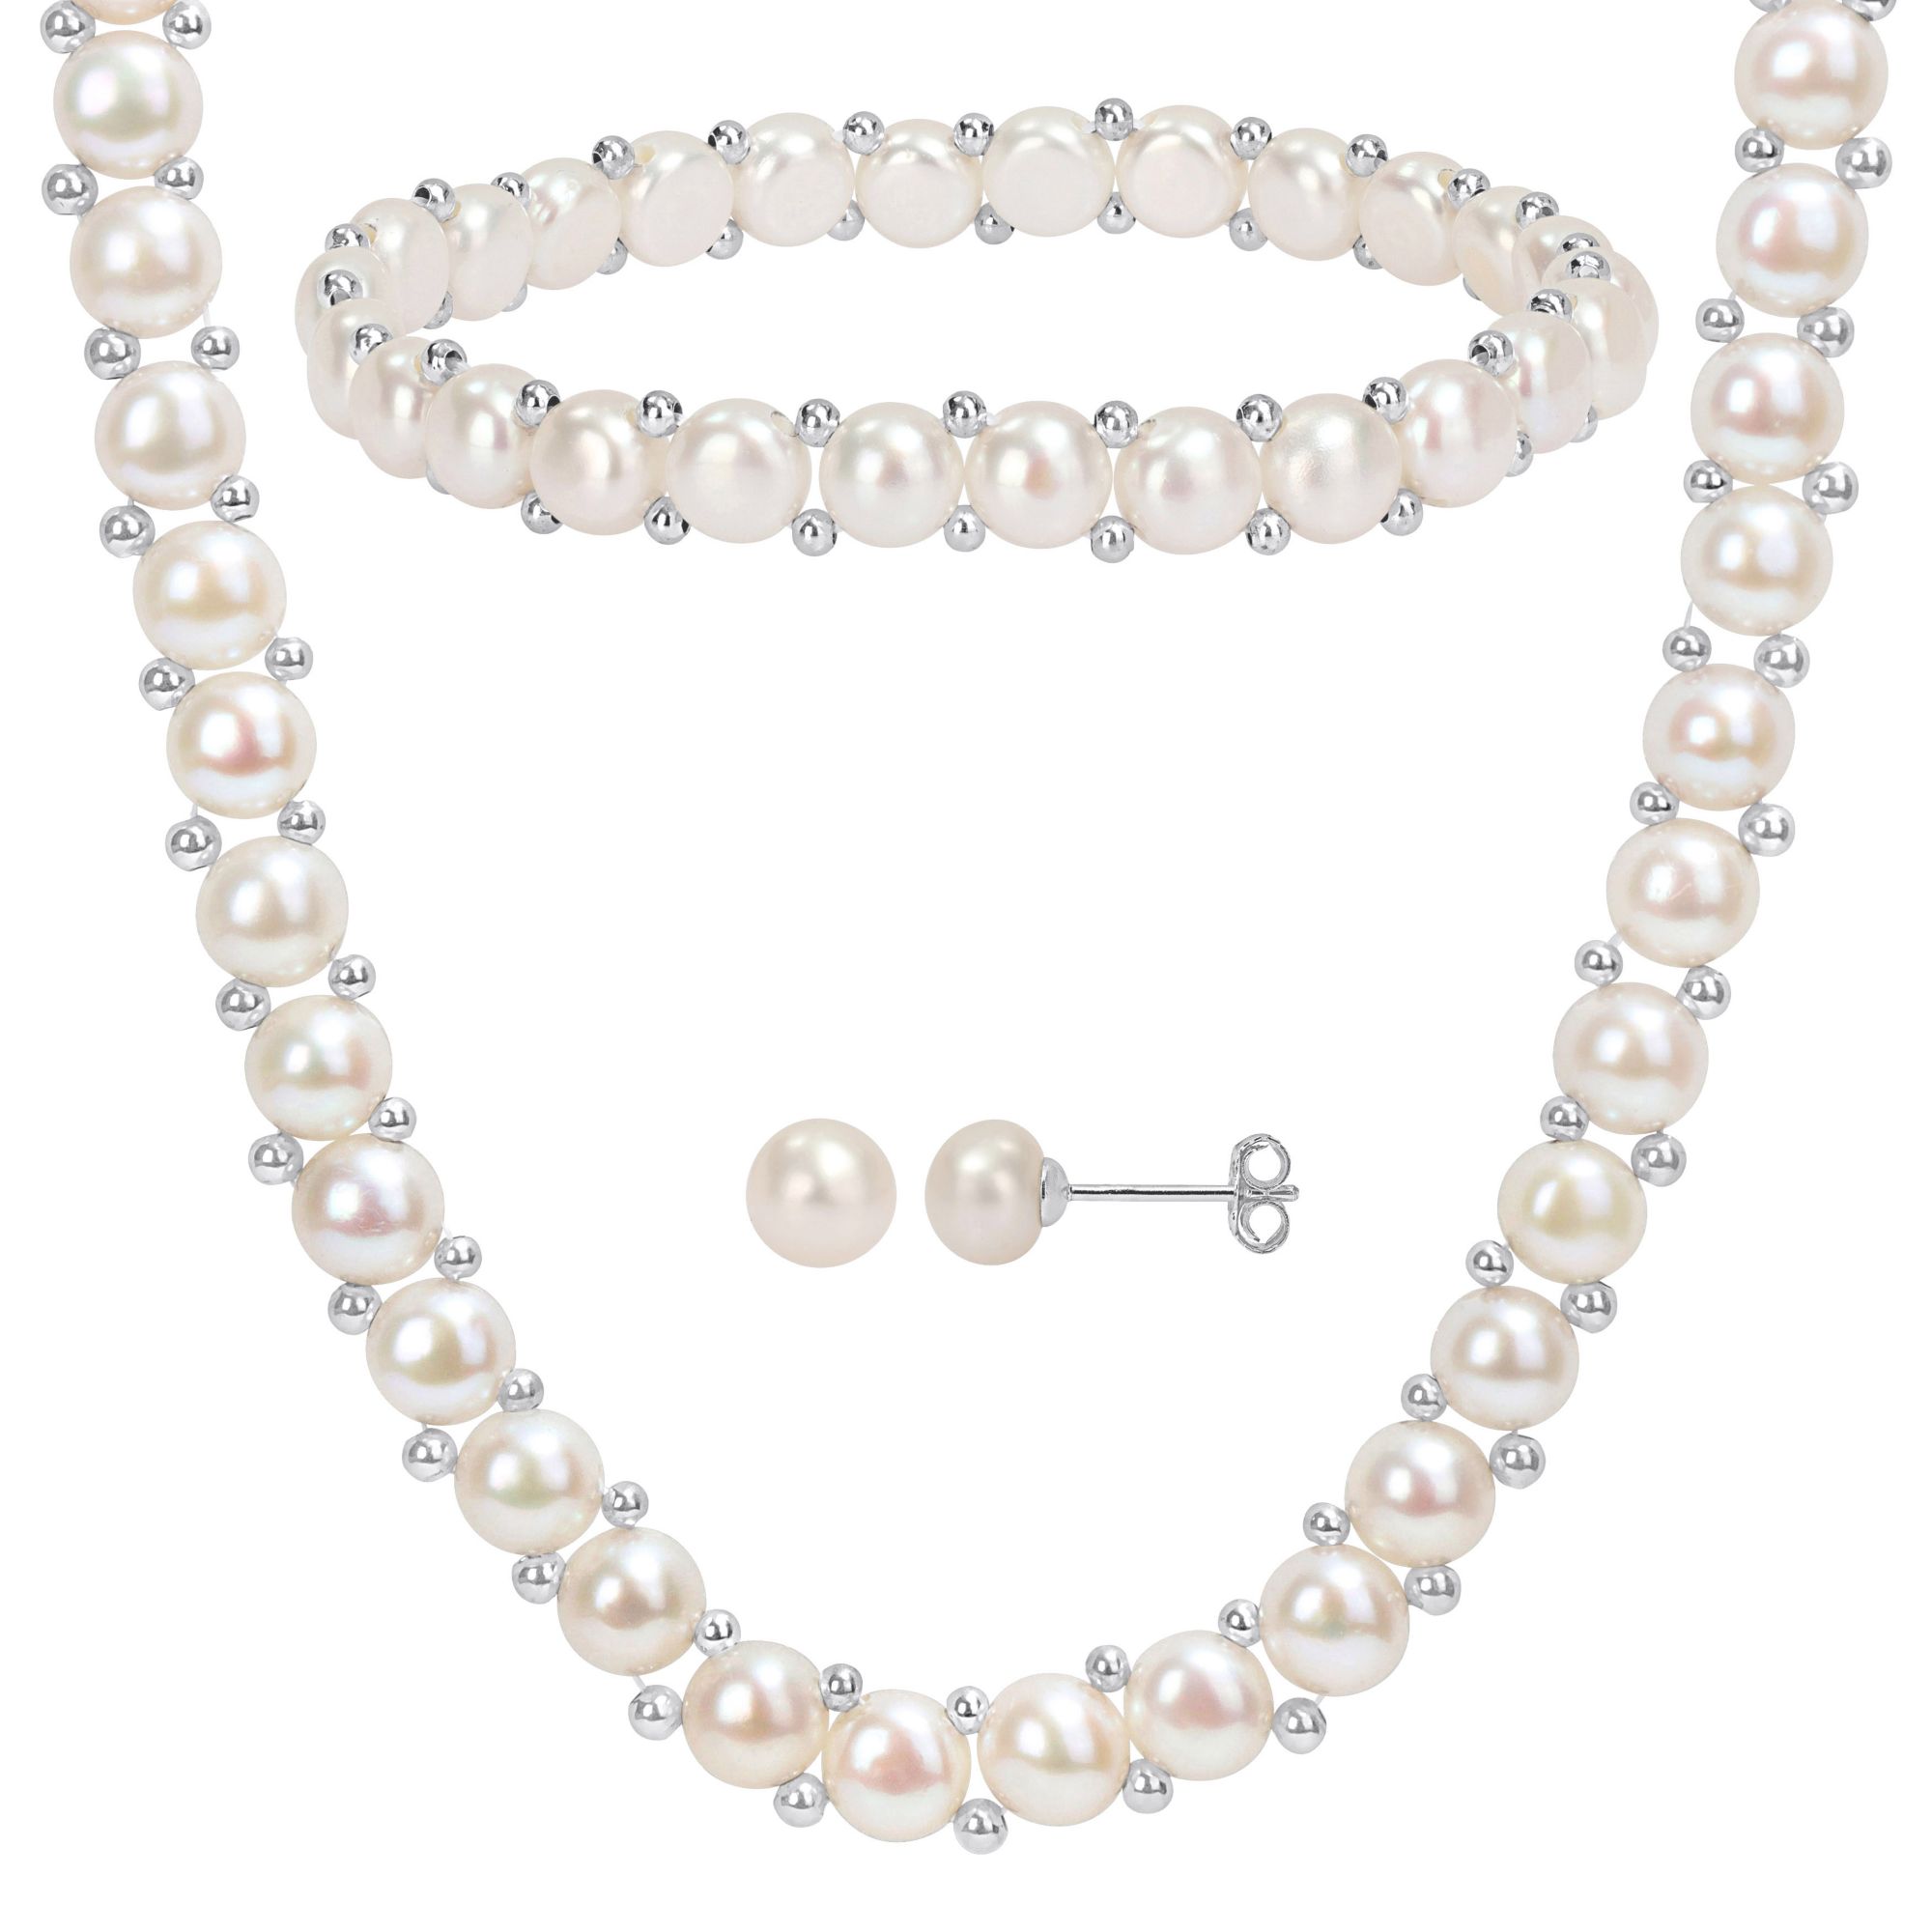 6-7mm Cultured Freshwater Pearl Strand Necklace, Bracelet and